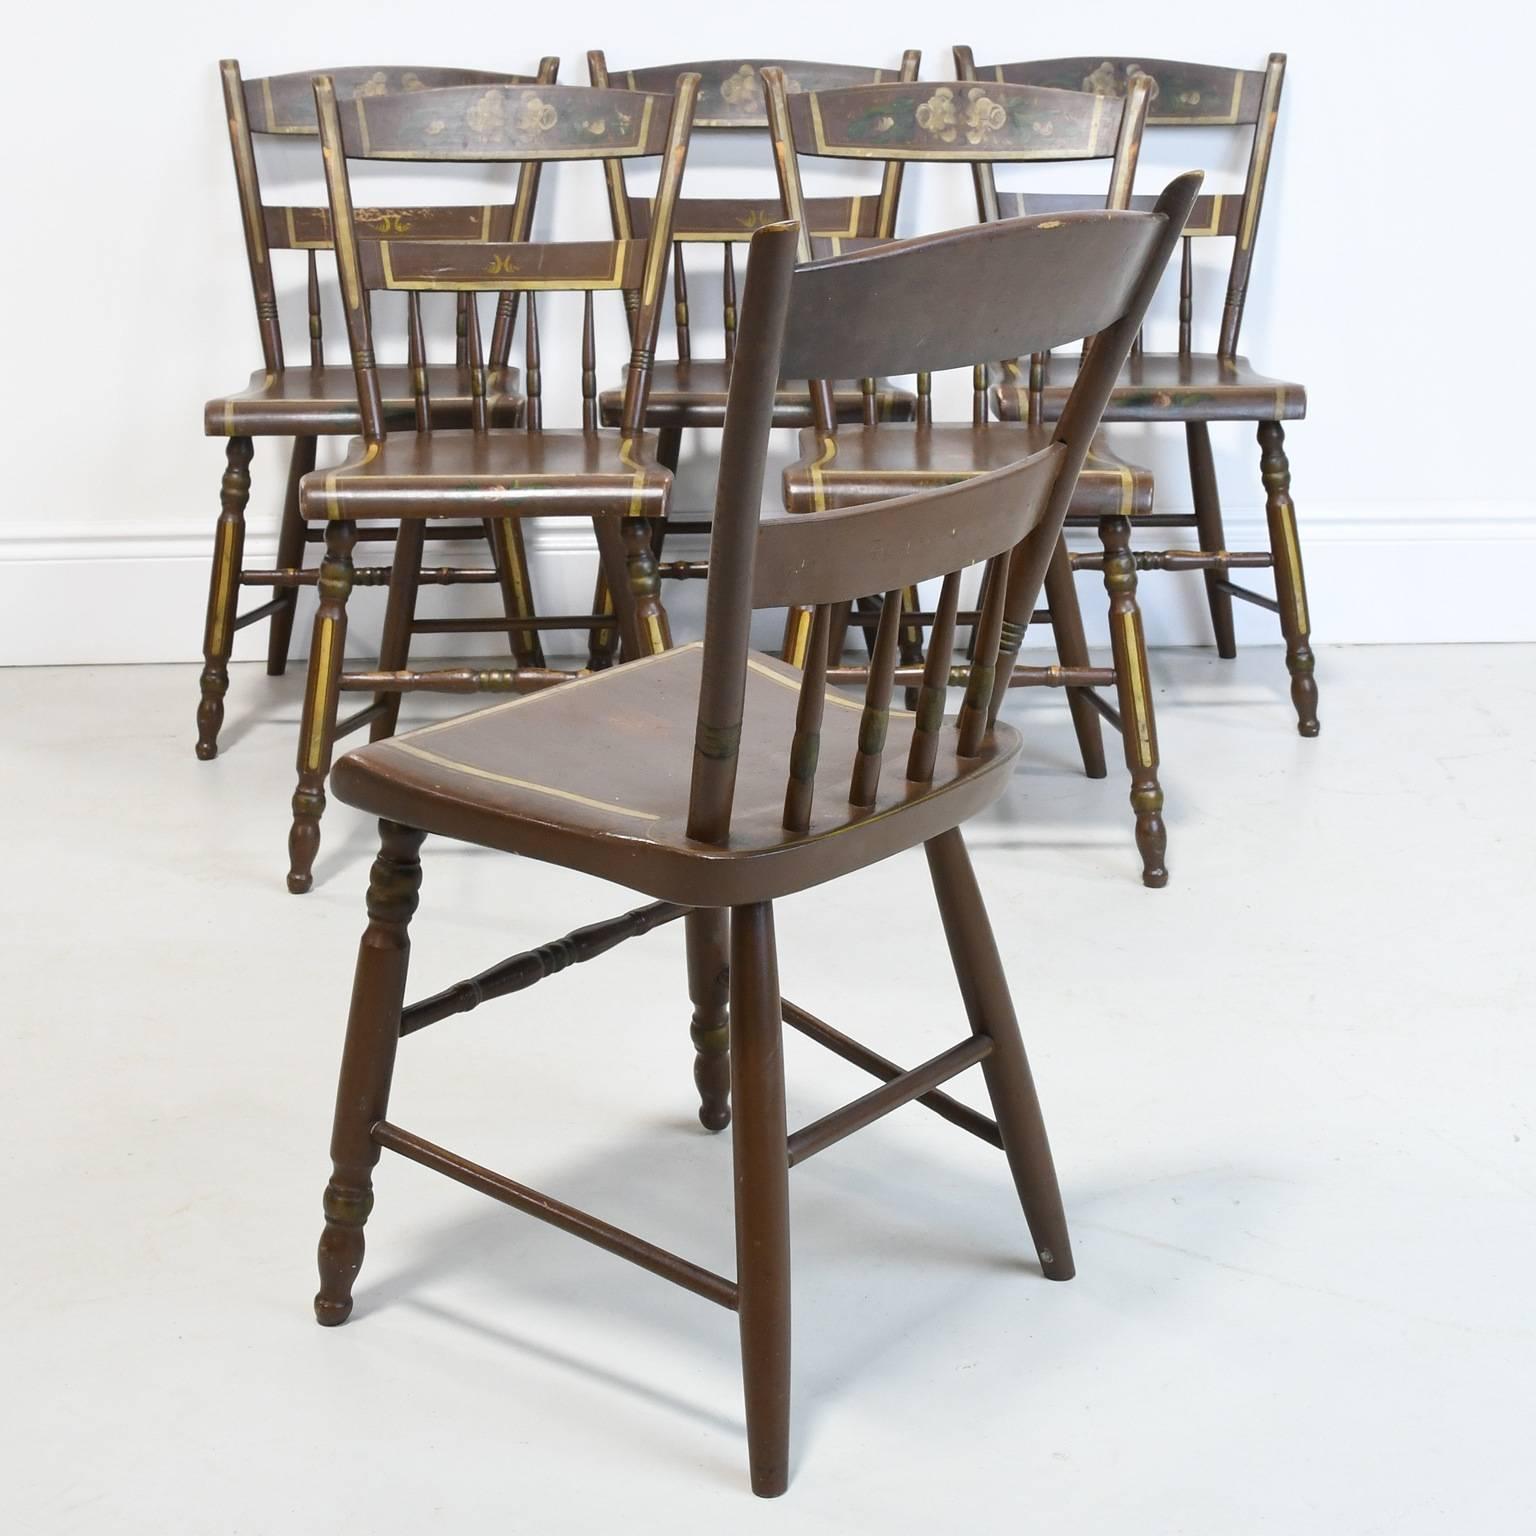 Rustic Set of Six Pennsylvania 1/2 Spindle Back Plank Seat Kitchen Chairs, circa 1870